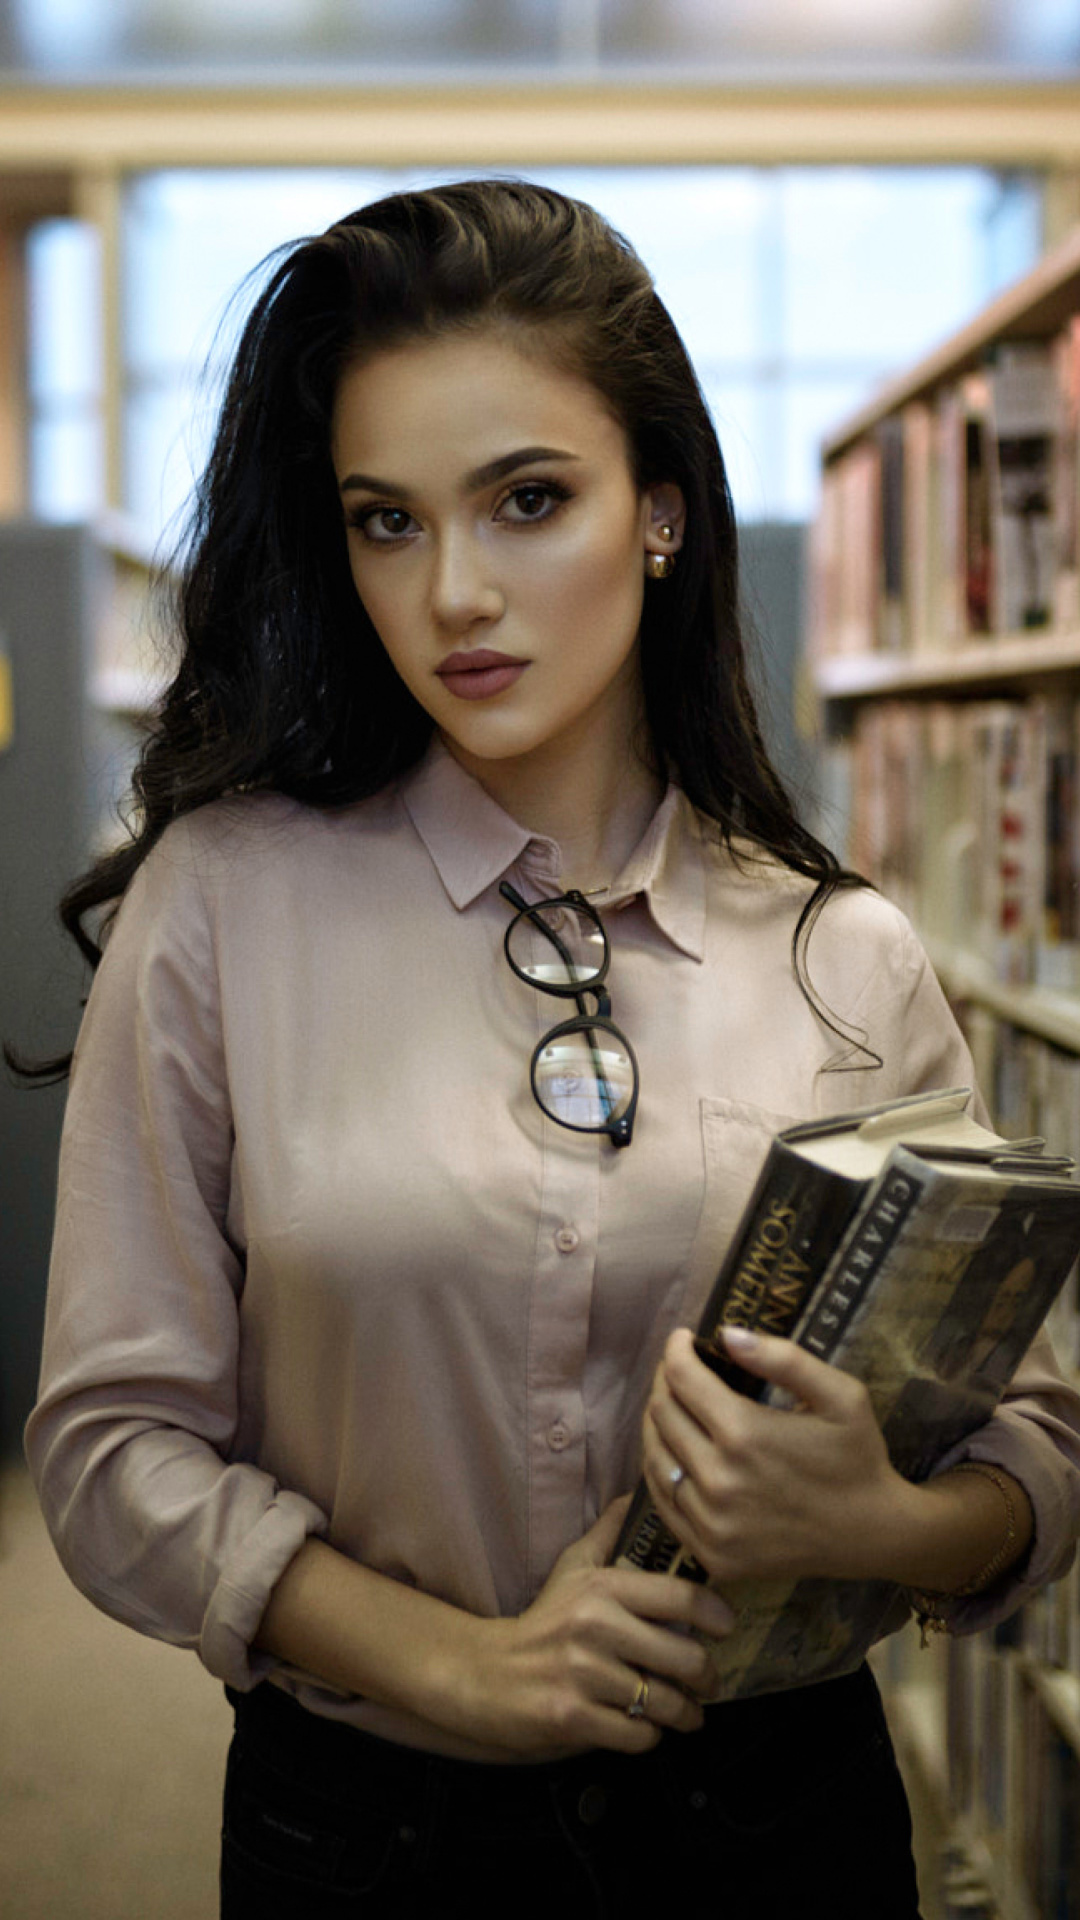 Girl with books in library wallpaper 1080x1920